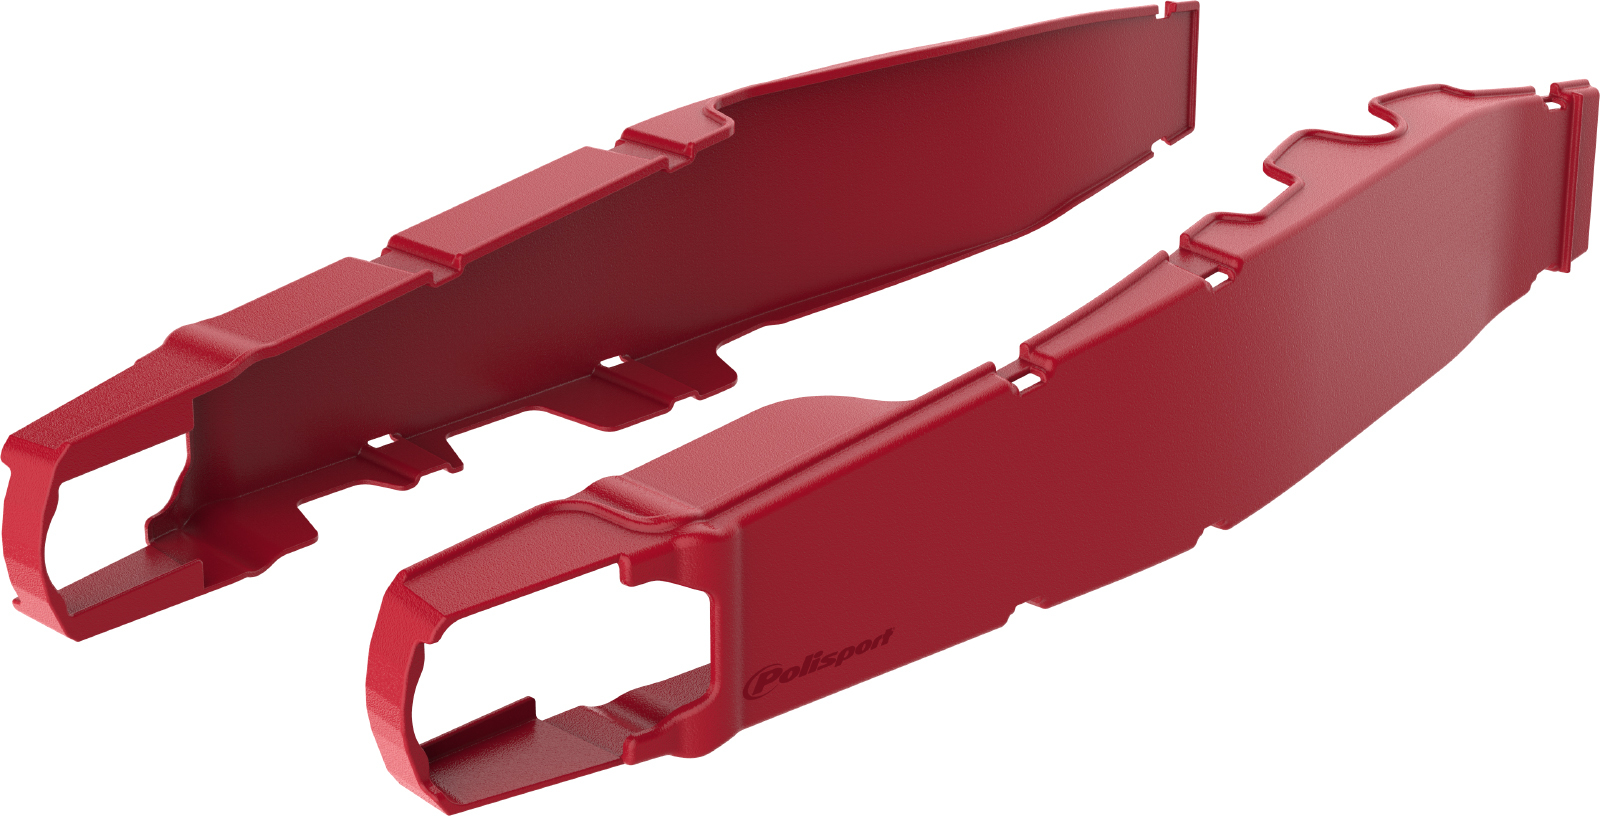 Red Swingarm Protectors - For 17-18 CRF450R/RX & 18-19 CRF250R/RX - Click Image to Close